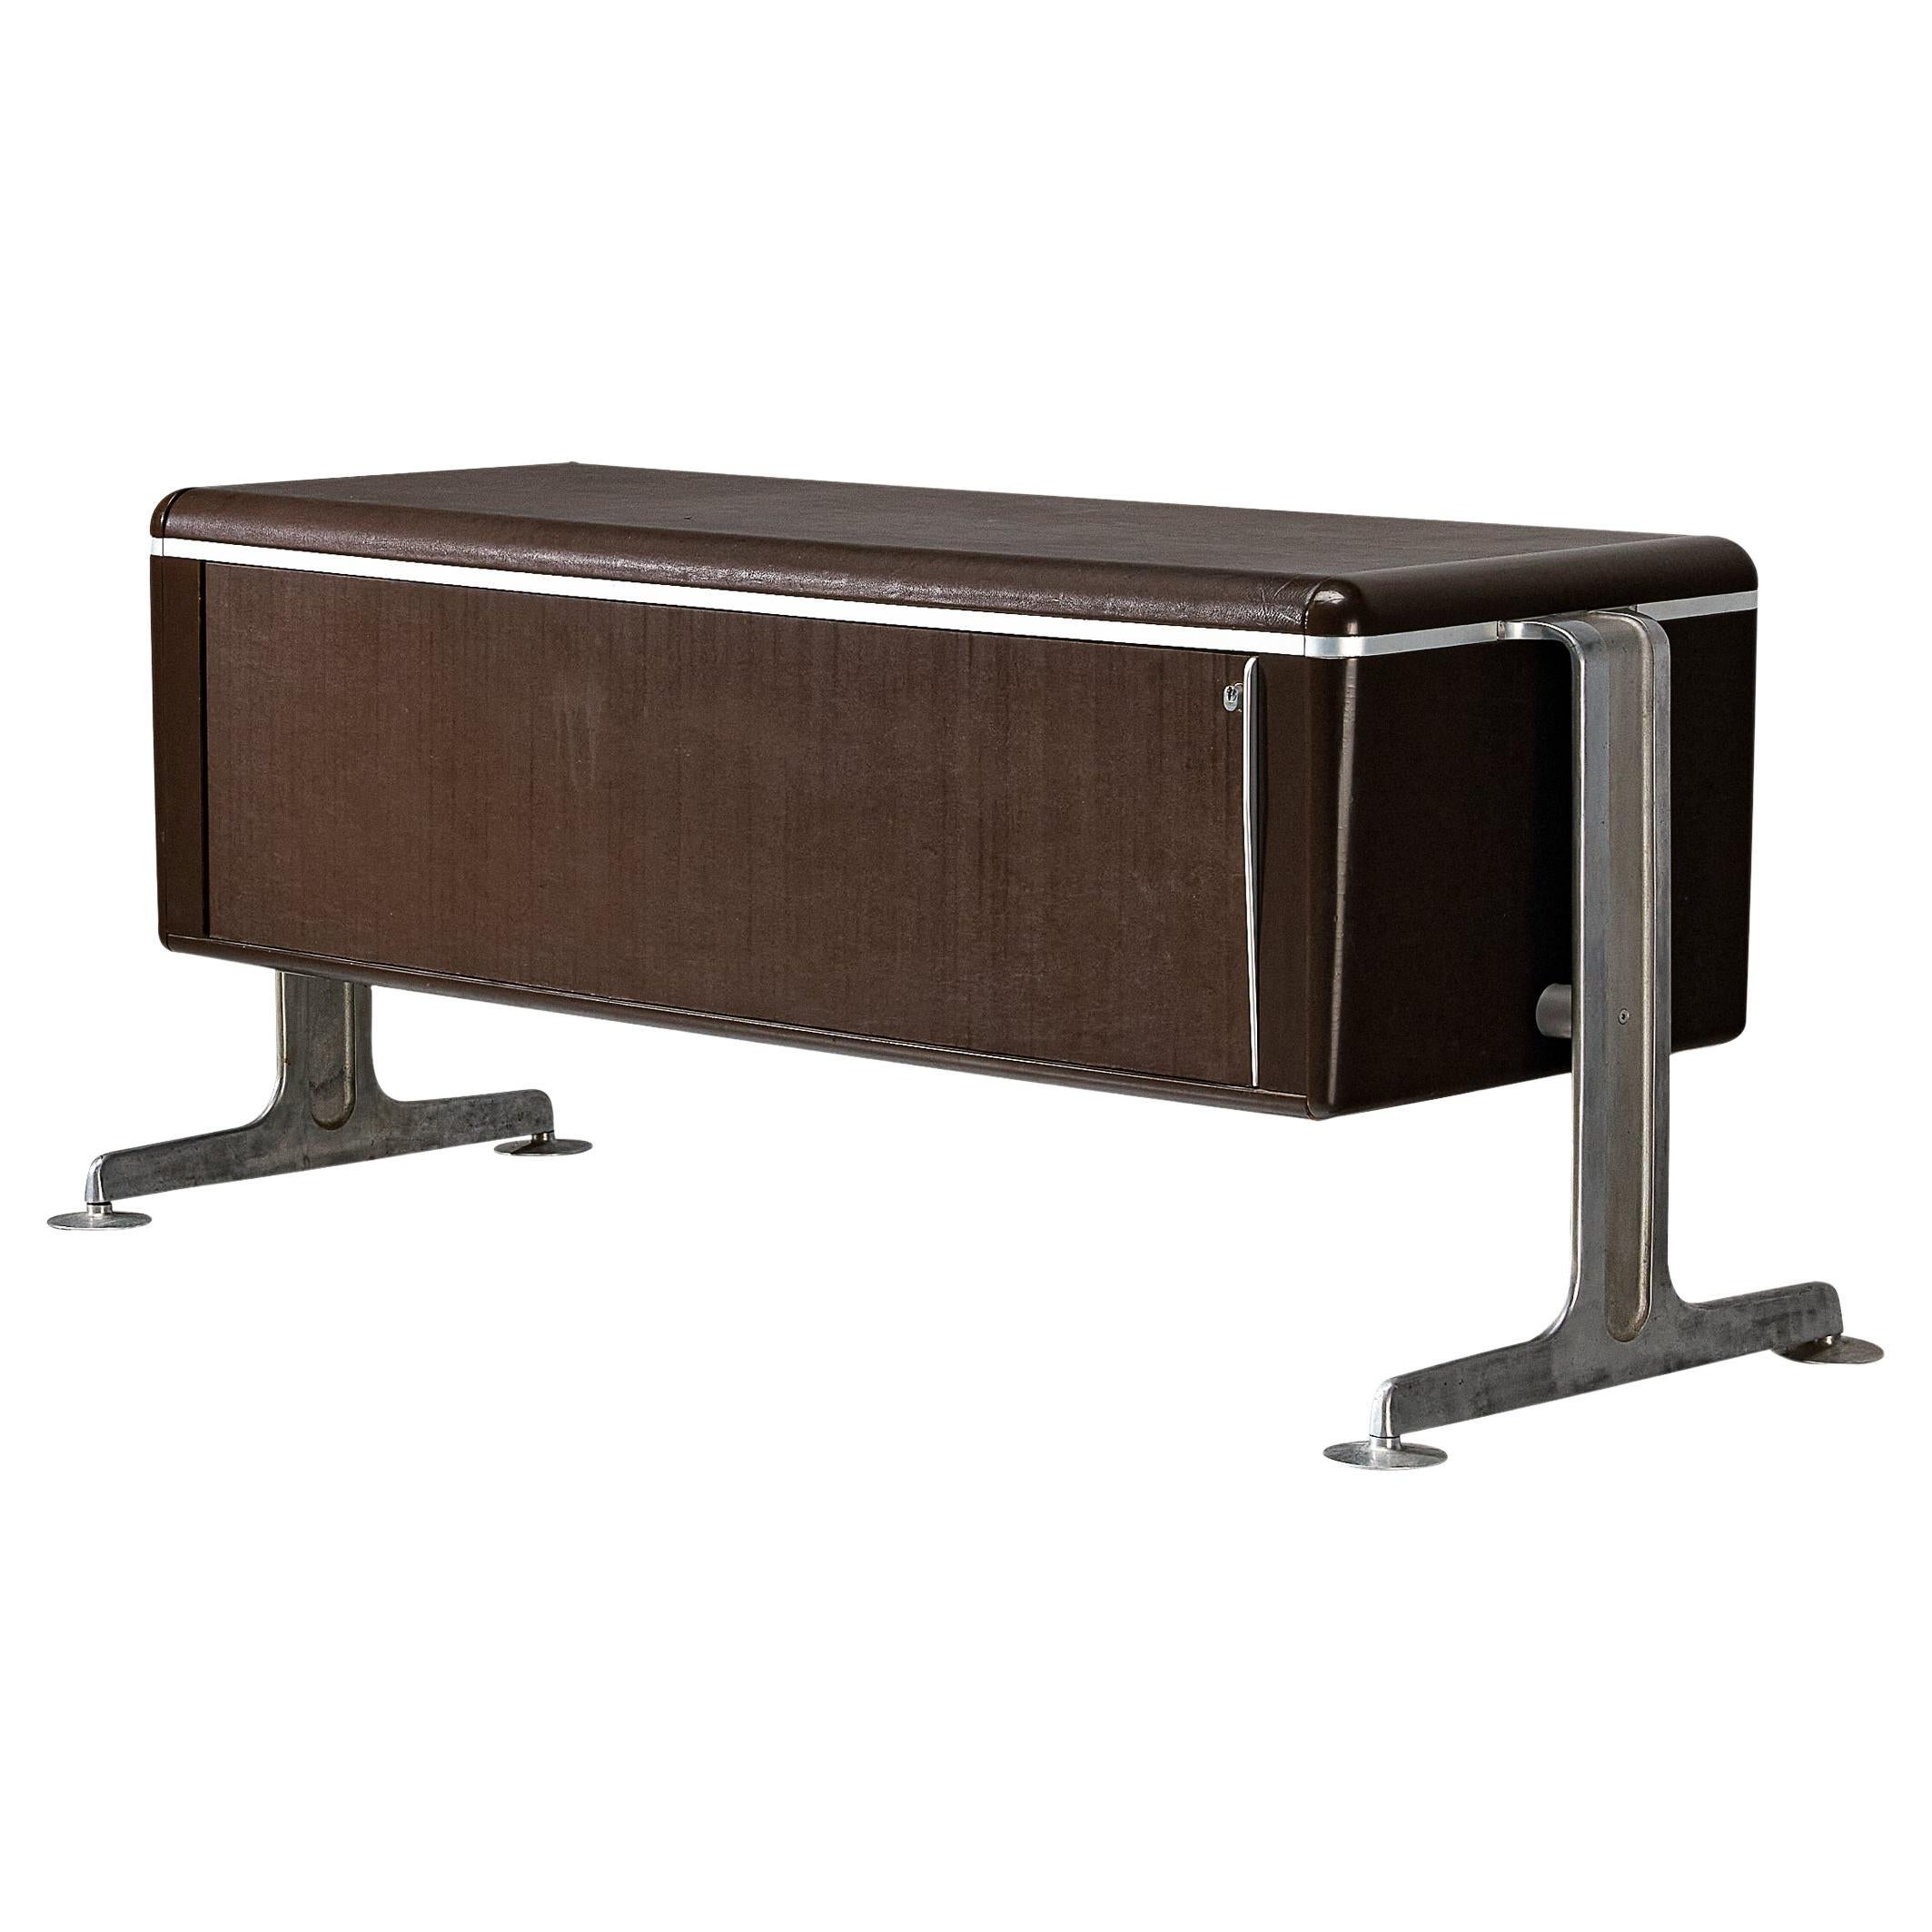 Alex Linder Sideboard in Dark Brown Leather and Aluminum For Sale